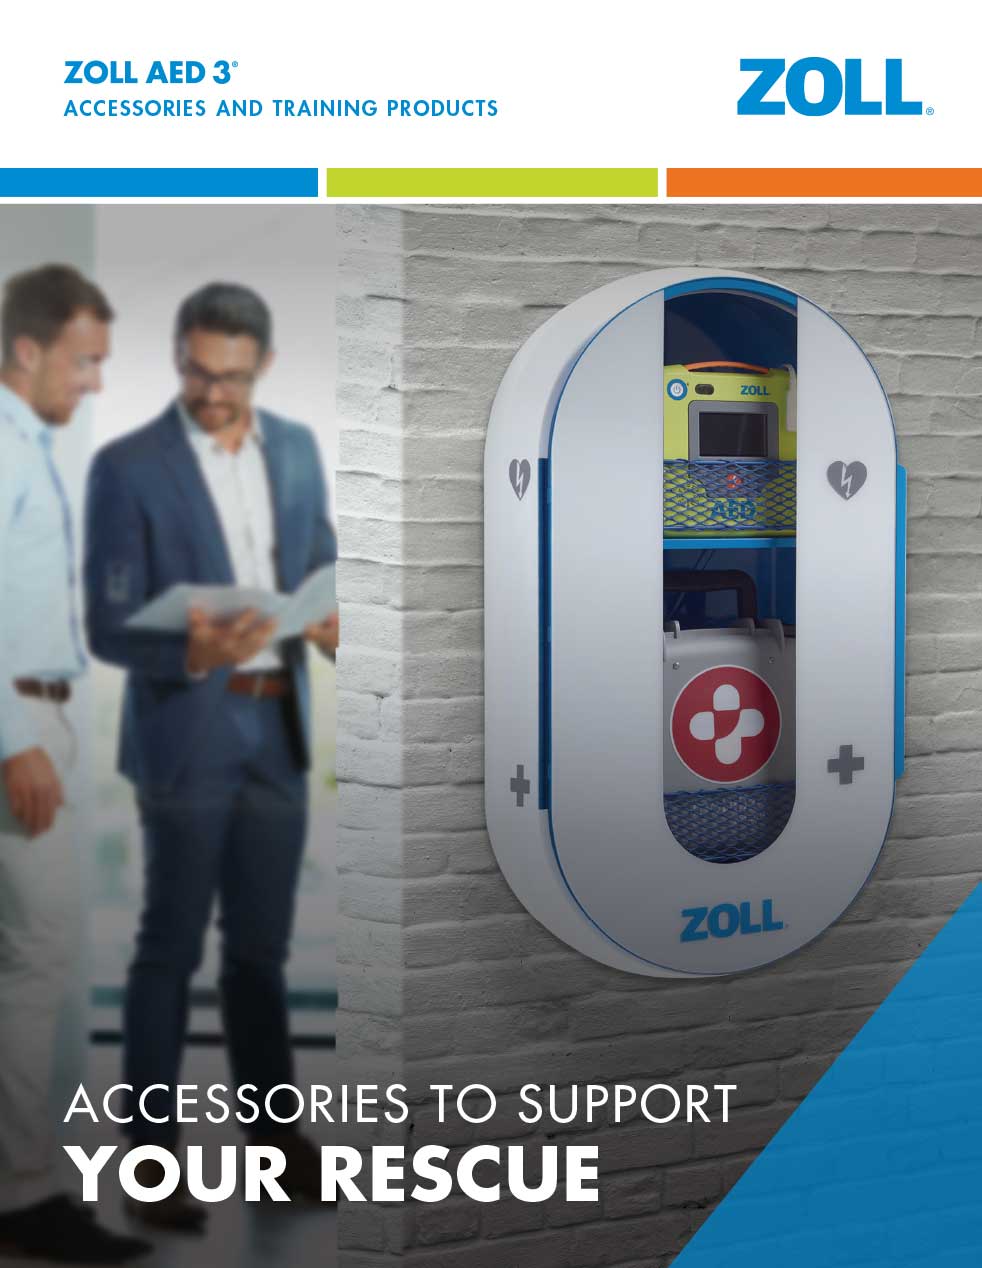 ZOLL AED 3 accessories brochure